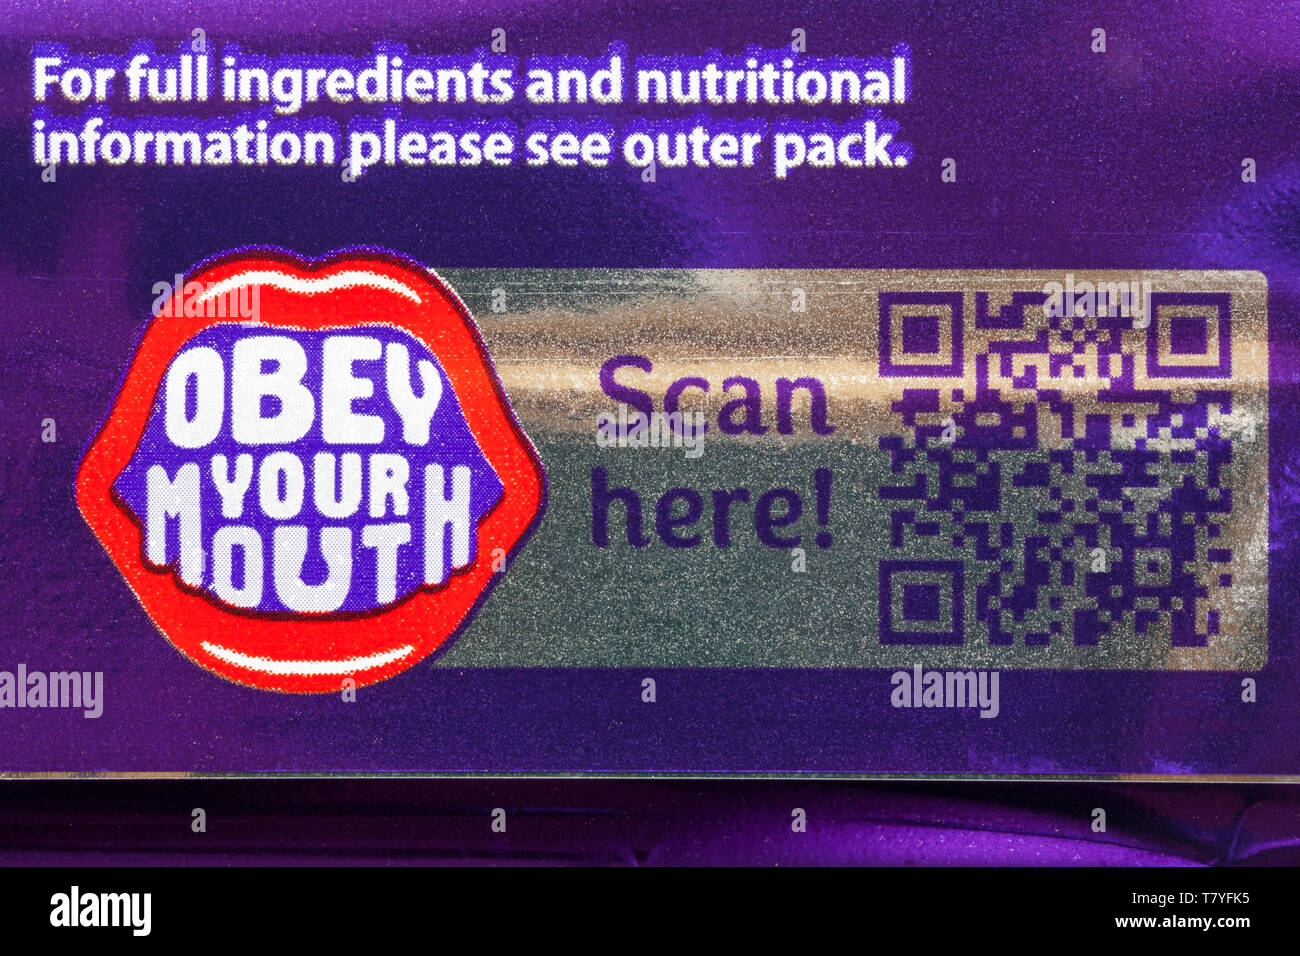 Obey your mouth, scan here - details on back of Wispa chocolate bar Stock Photo